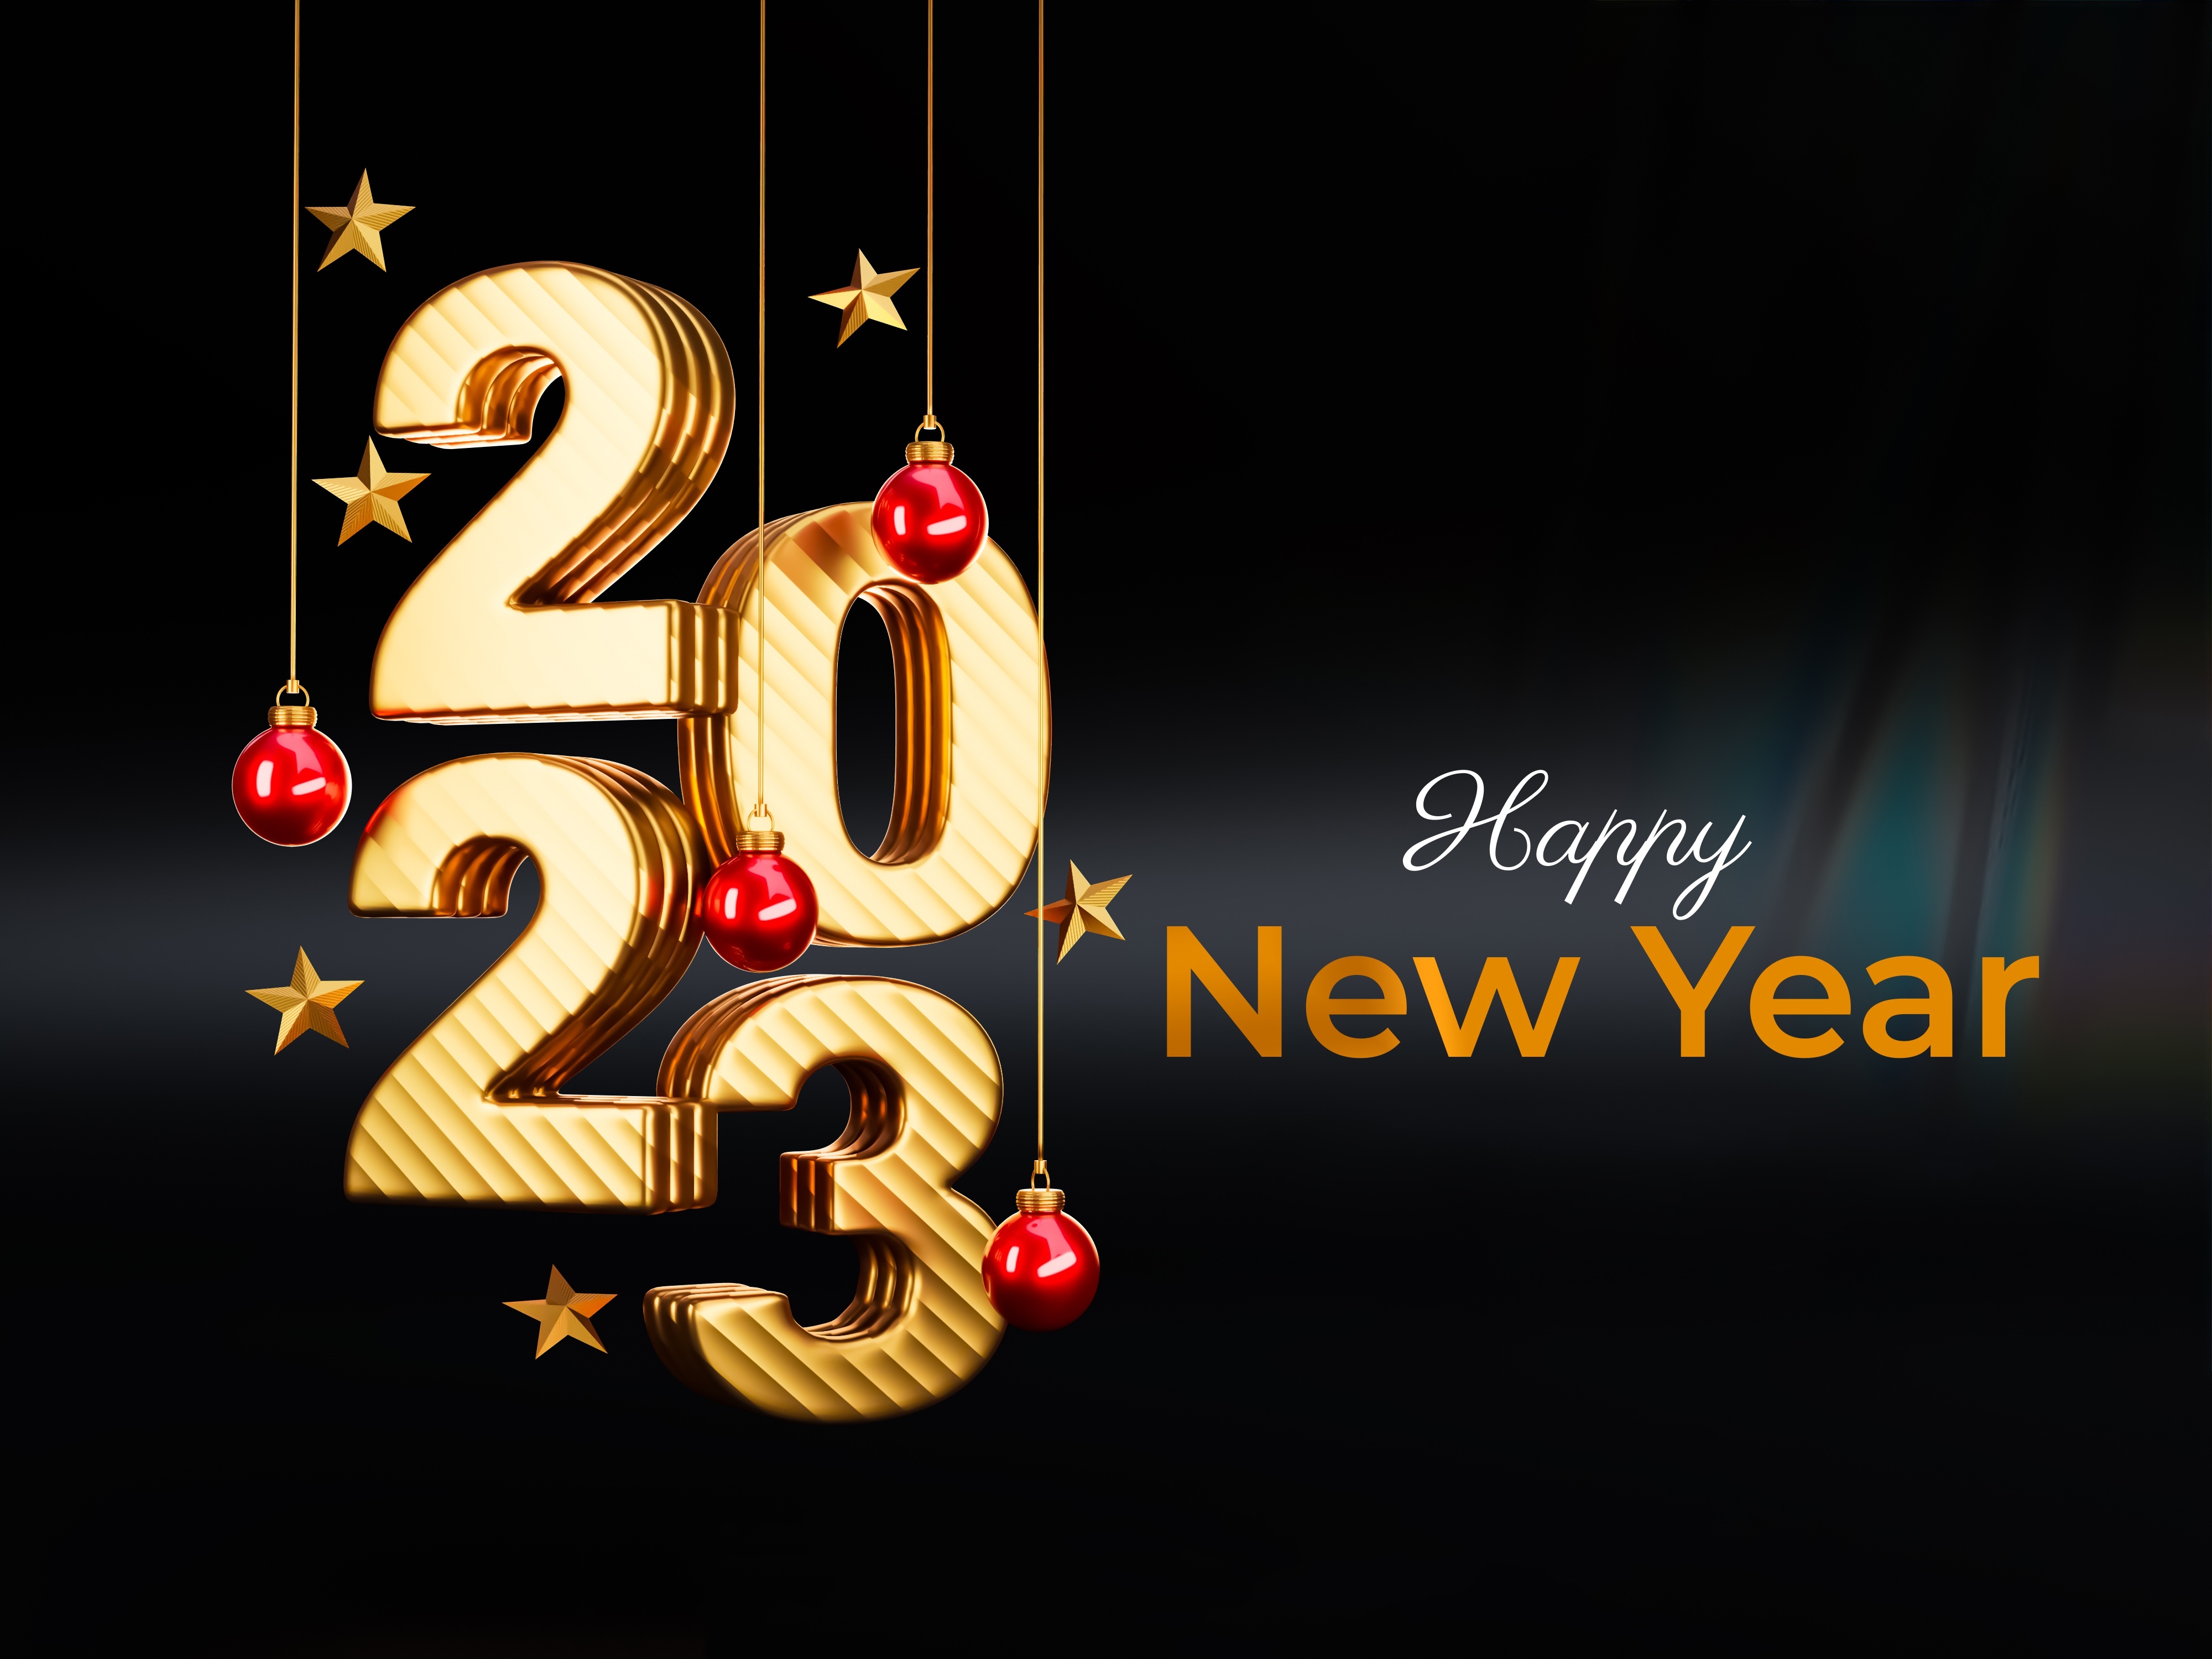 2023 New Year 4k Wallpaper, HD Holidays 4K Wallpapers, Images, Photos